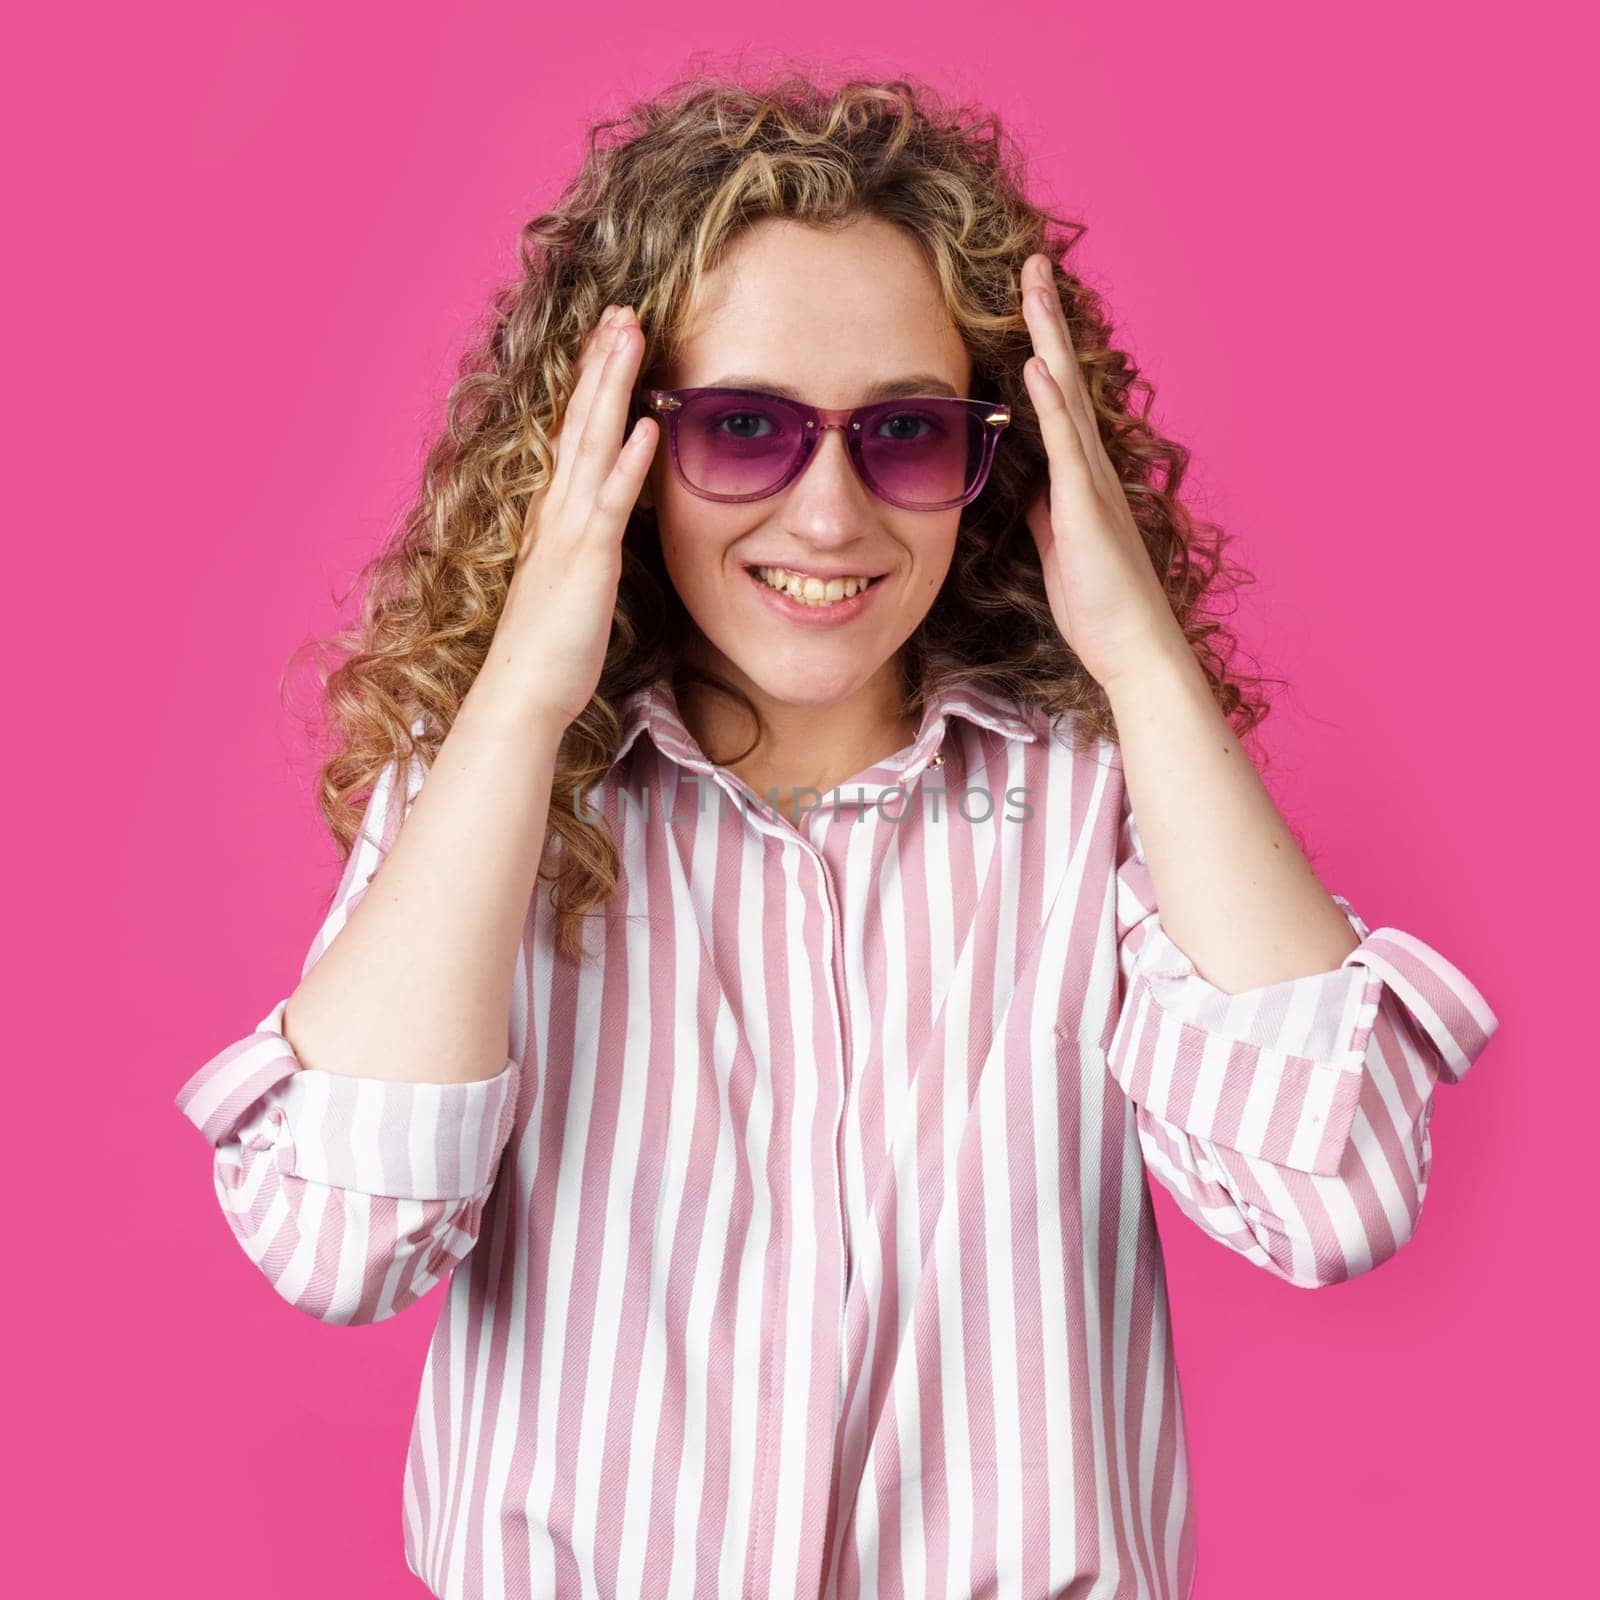 A young woman holds her head with her hands with delight and joy. Isolated on pink background